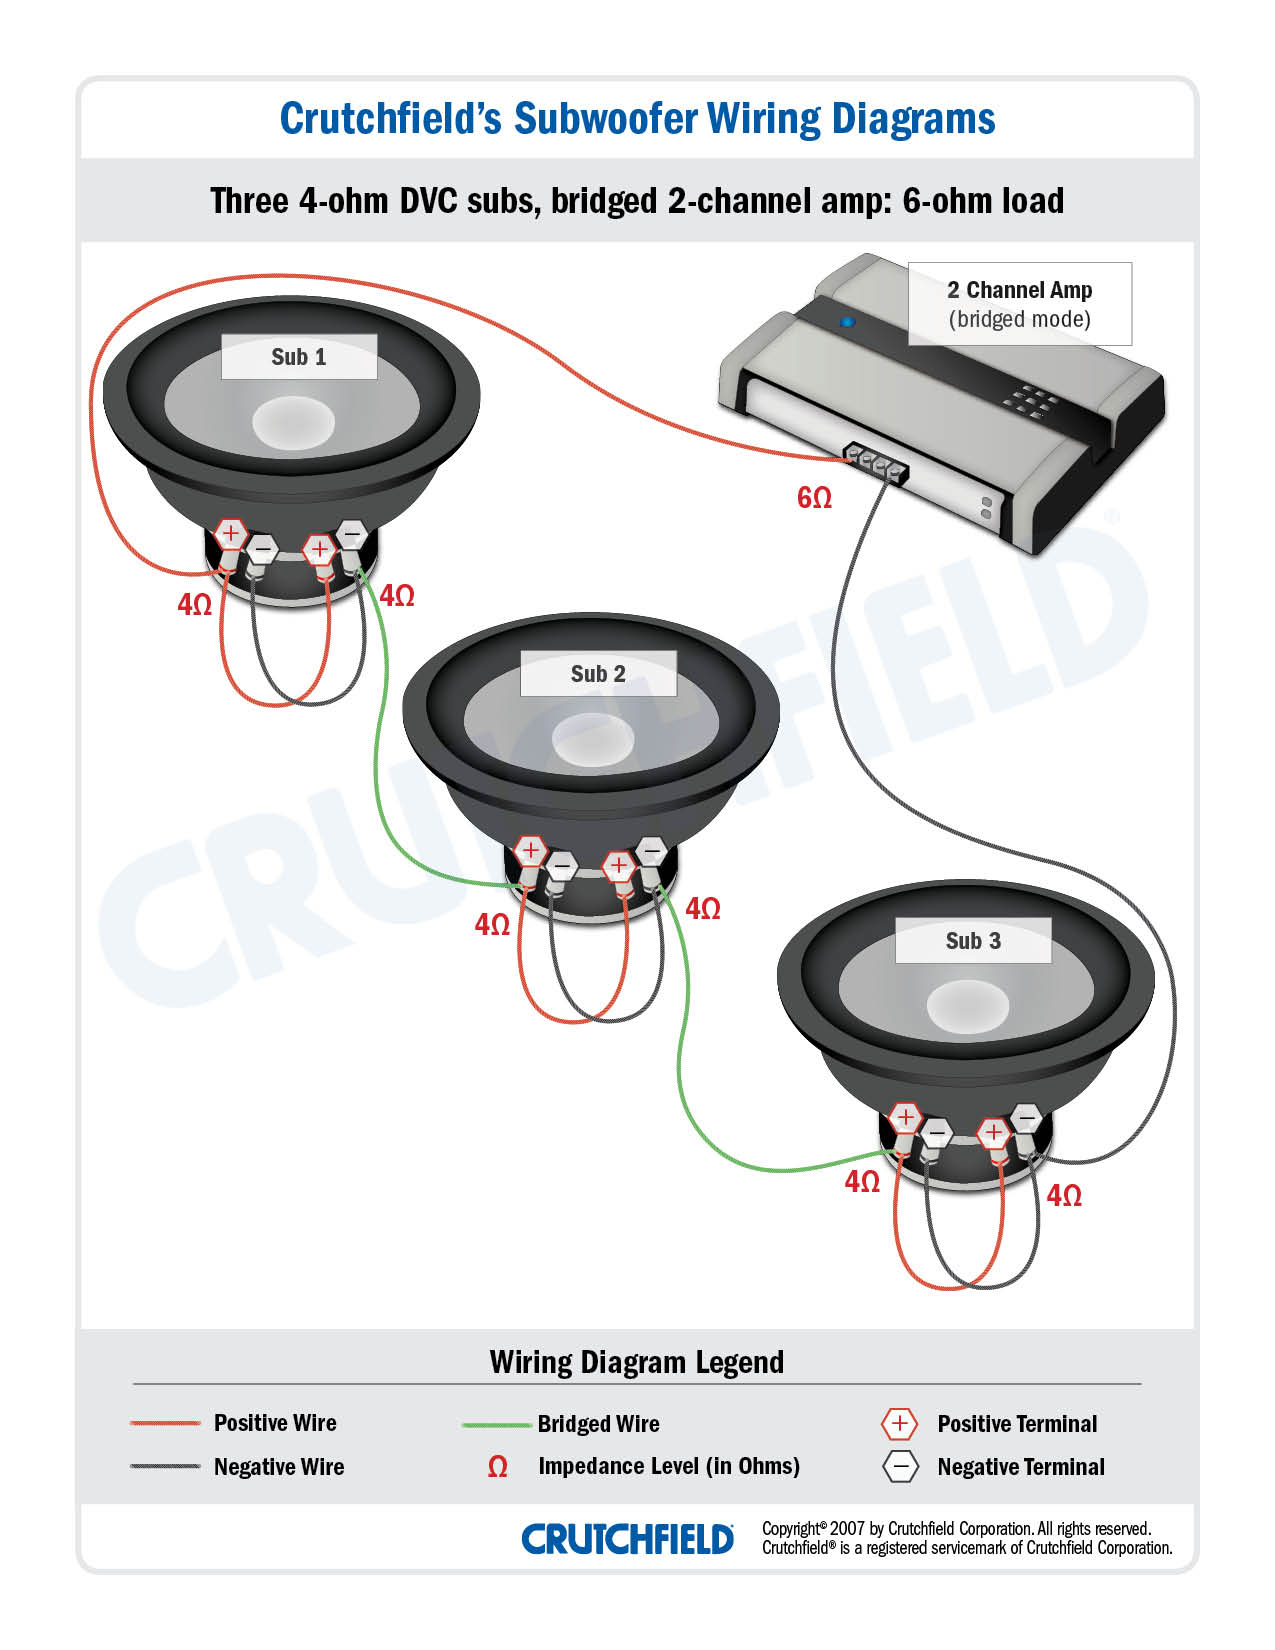 Subwoofer Wiring Diagrams — How To Wire Your Subs - Kicker Comp R 12 Wiring Diagram